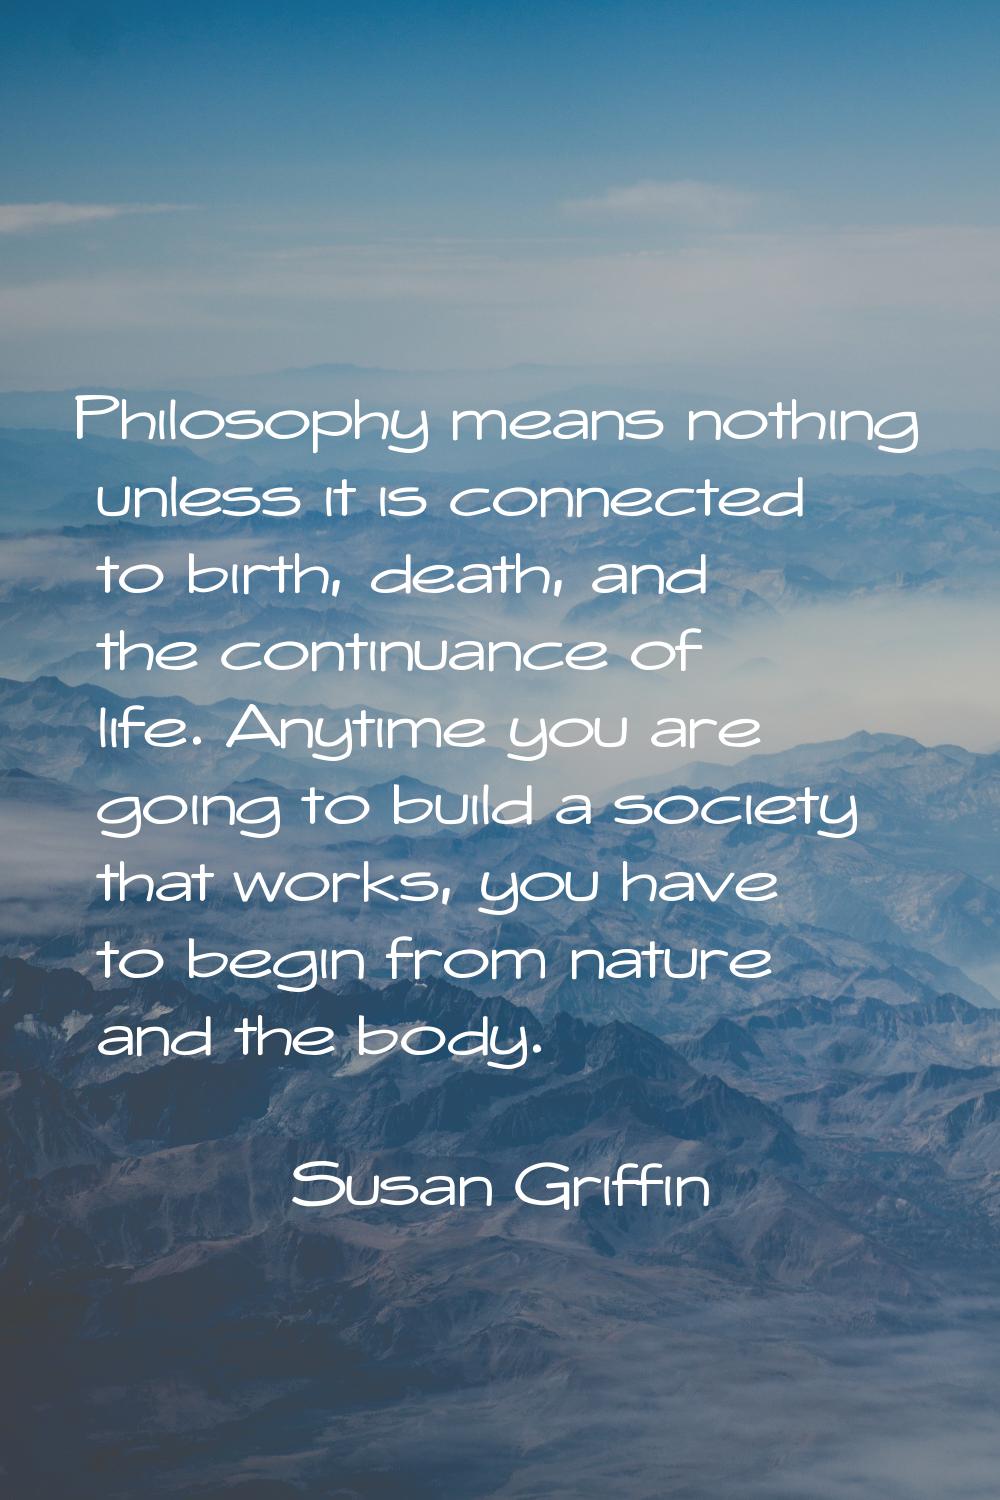 Philosophy means nothing unless it is connected to birth, death, and the continuance of life. Anyti